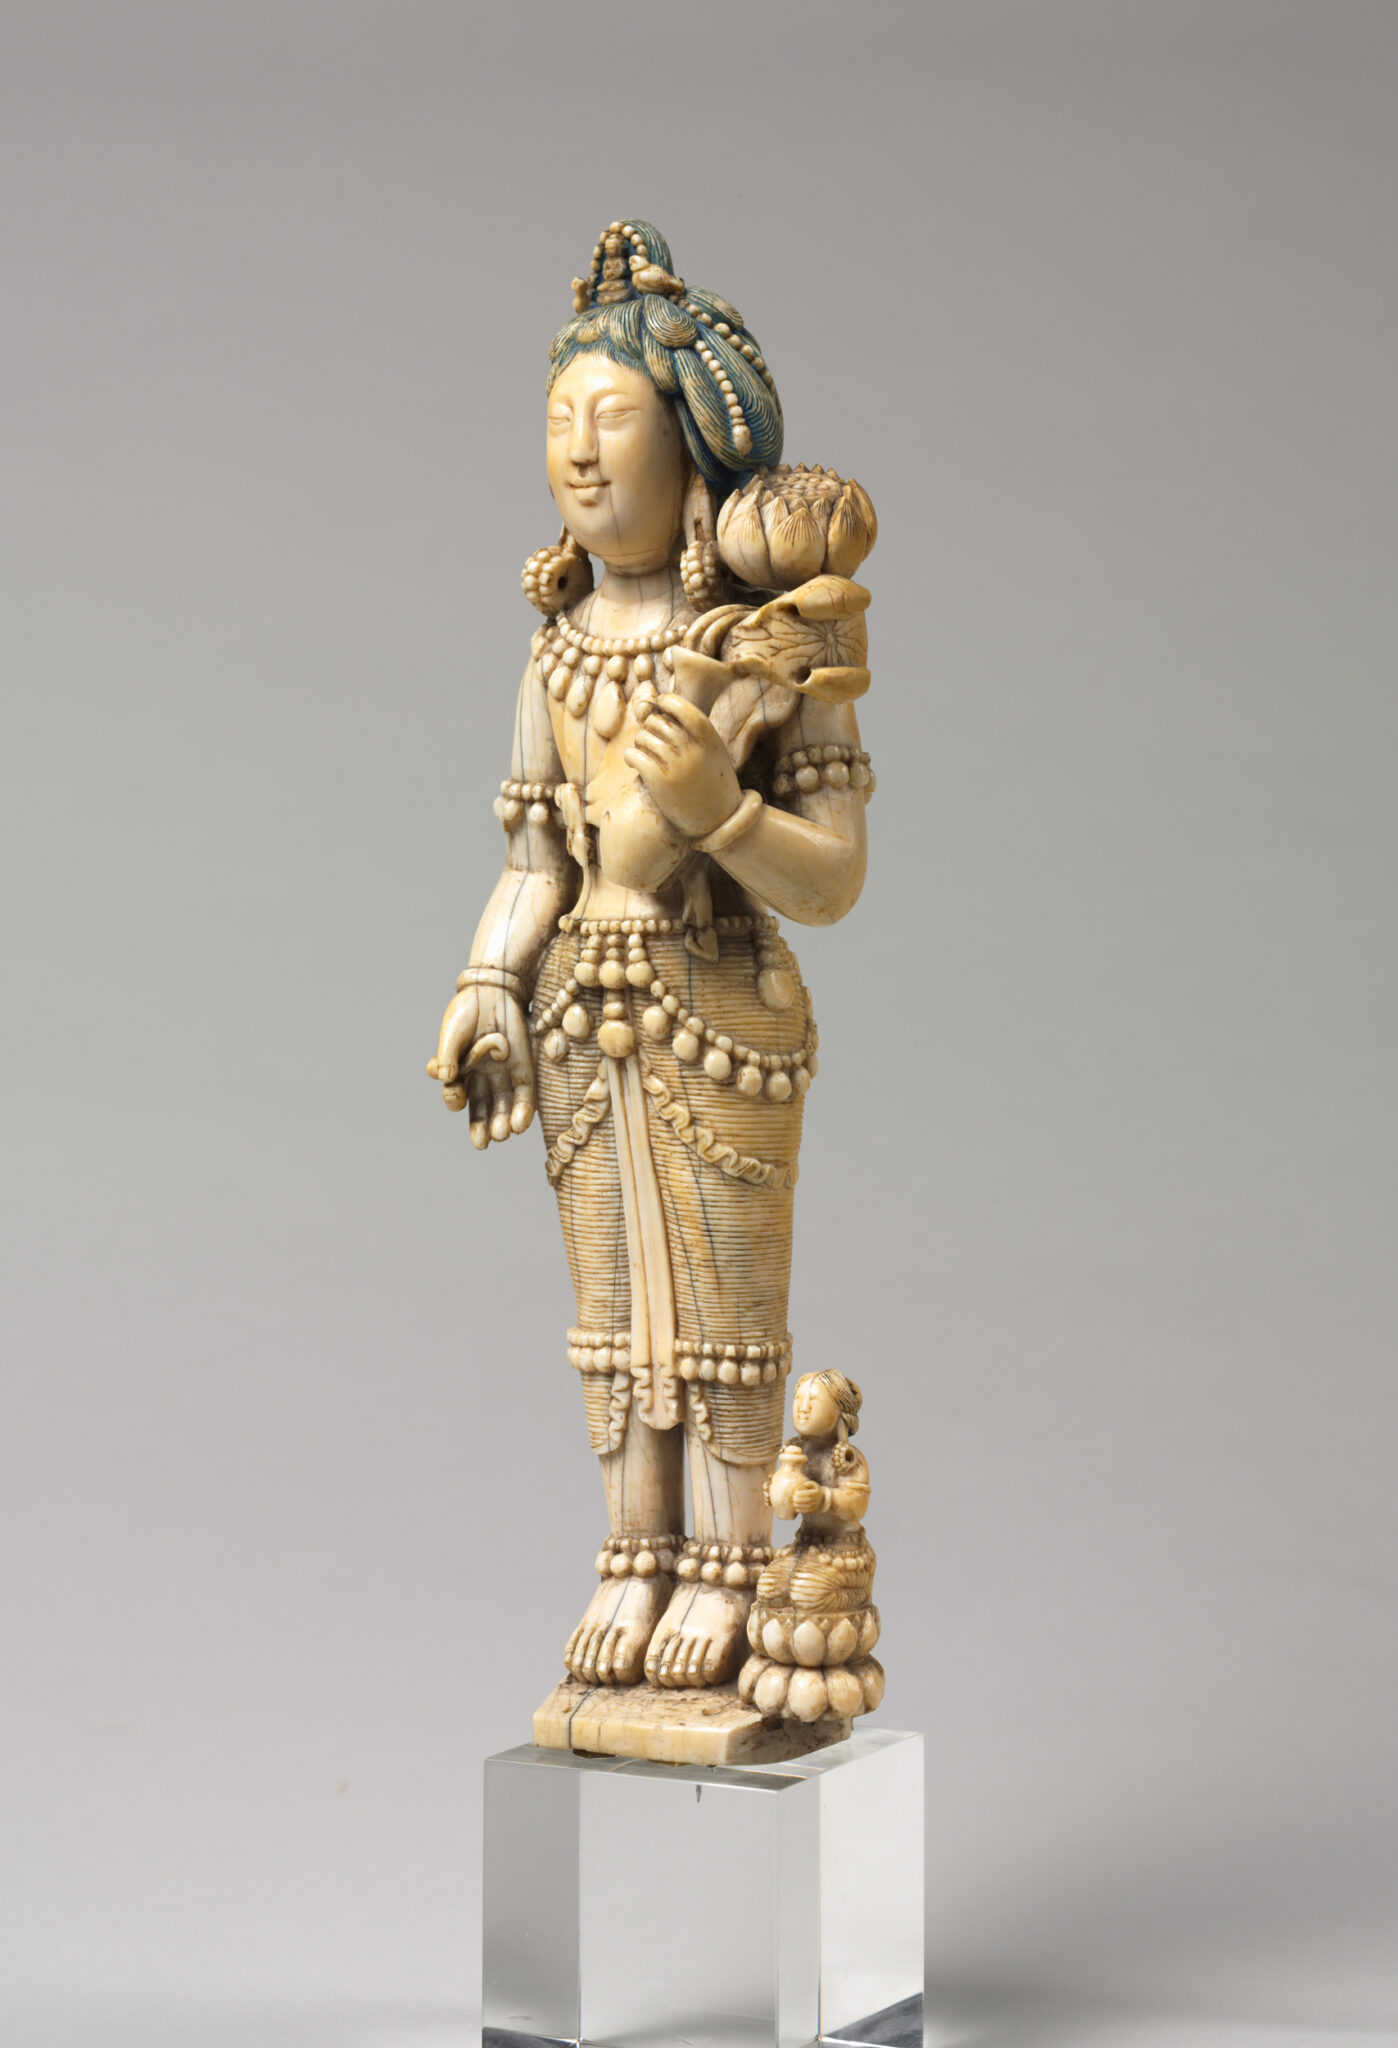 Three-quarter profile view of ivory statuette depicting Bodhisattva wearing finely articulated dhoti and accessories